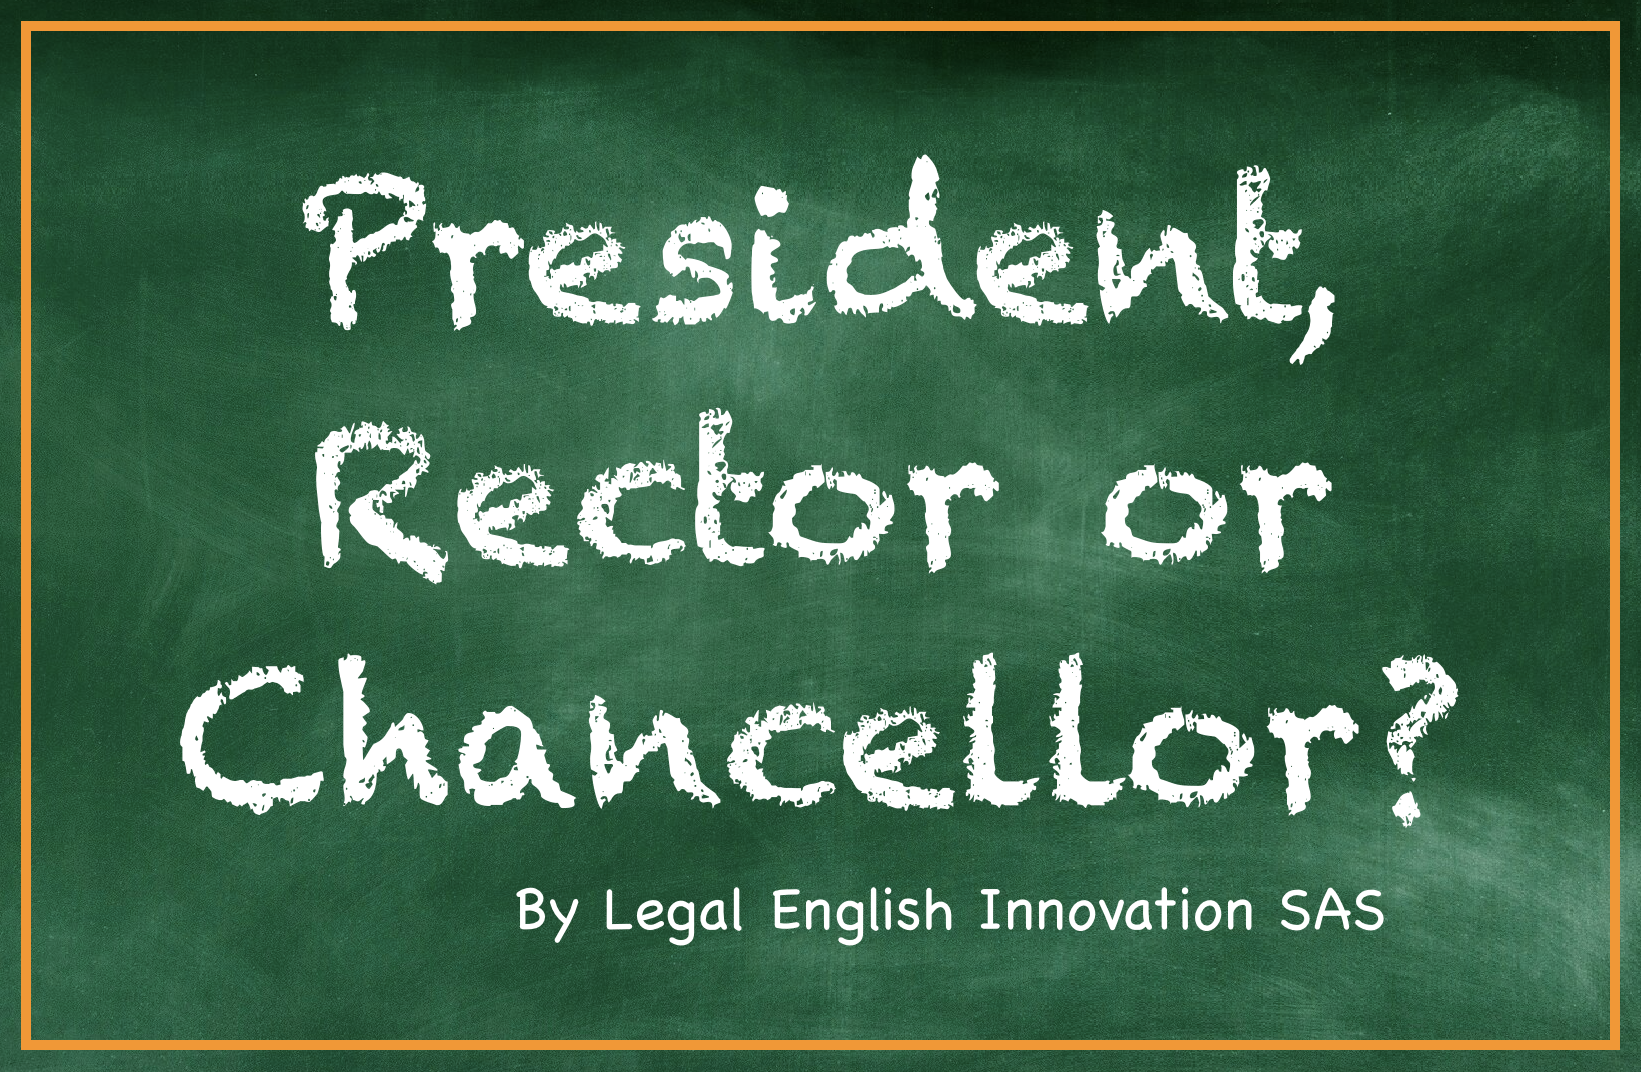 Is it a President, Rector or Chancellor in Legal English?